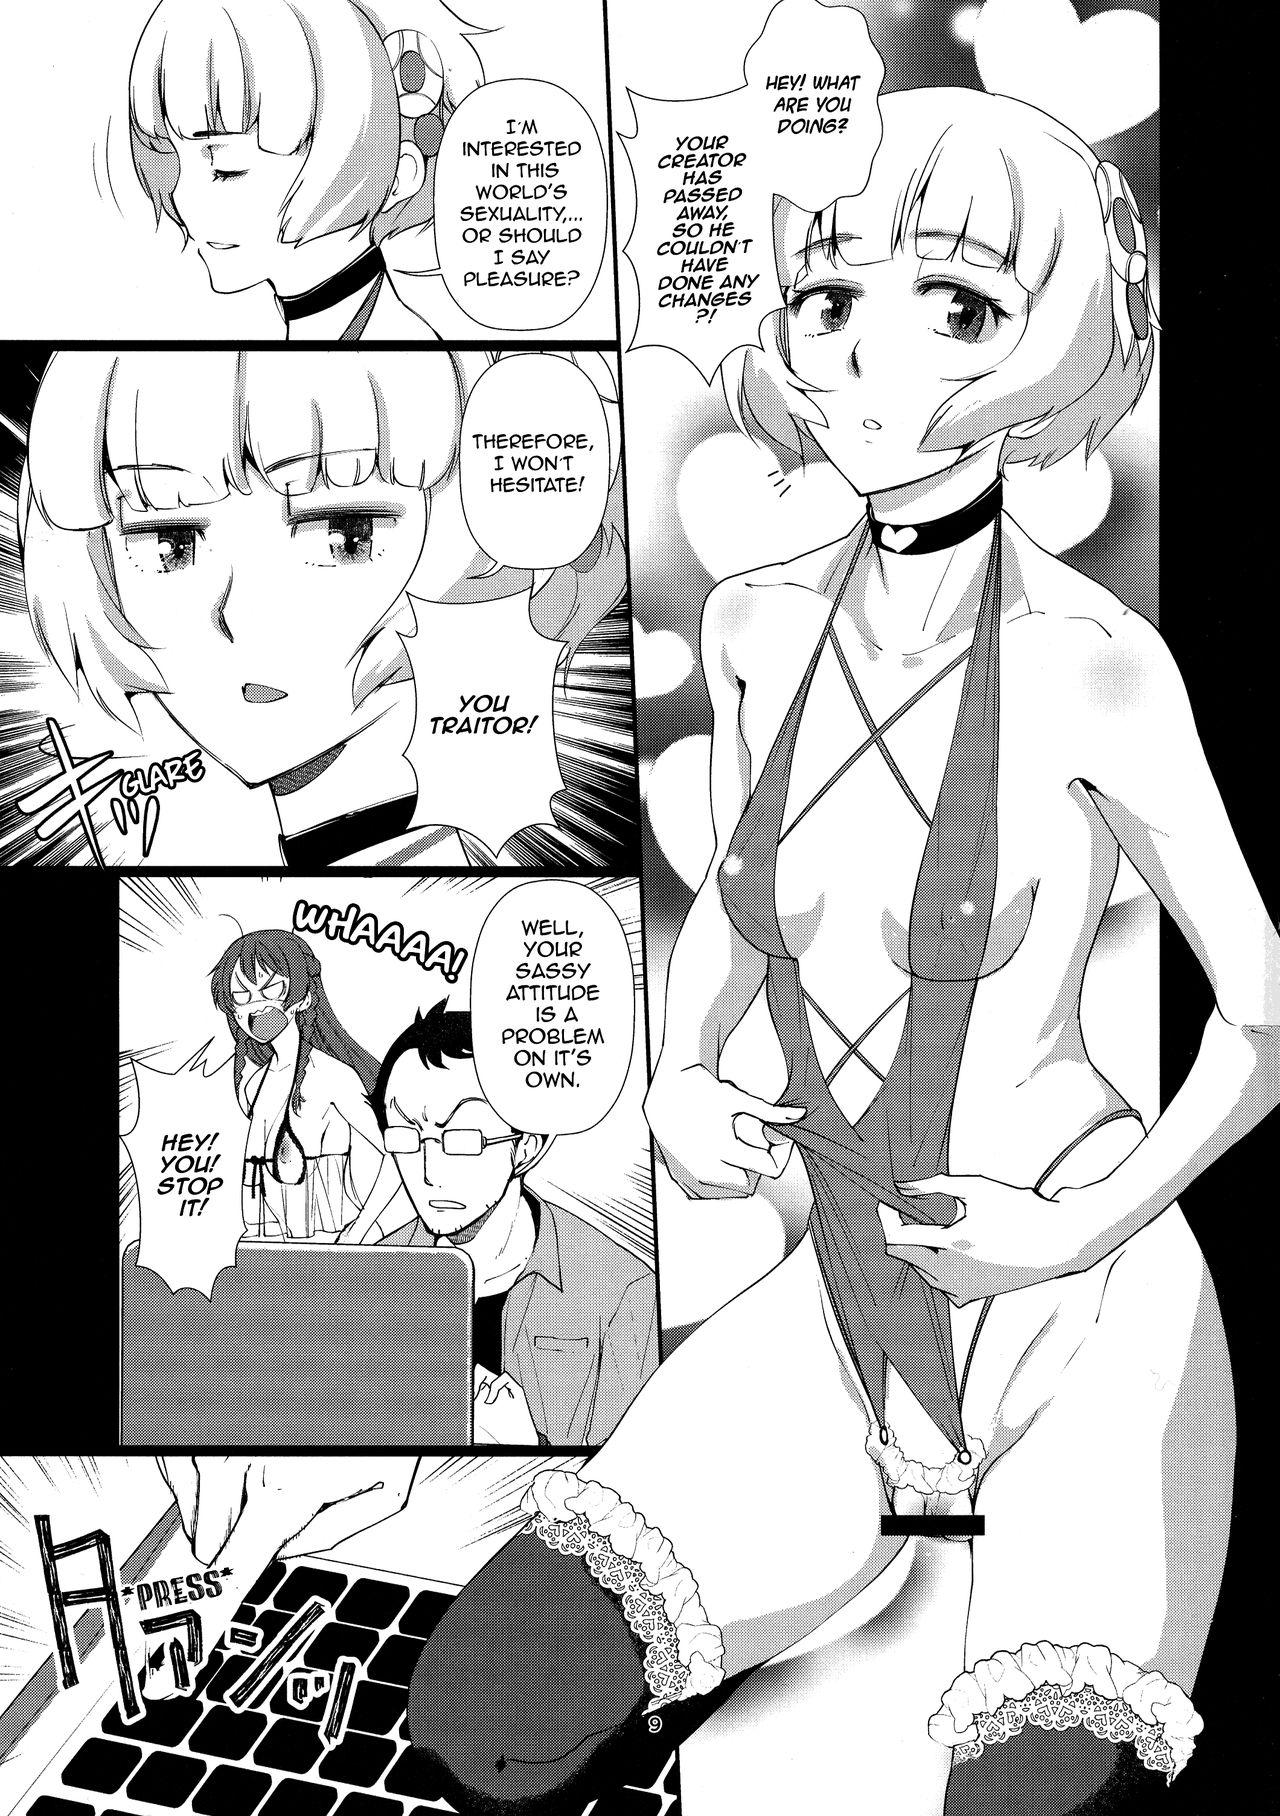 Hot Fucking Kaihen Shite Mima SHOW! | Lets´ SHOW our transformation! - Re creators High Heels - Page 9